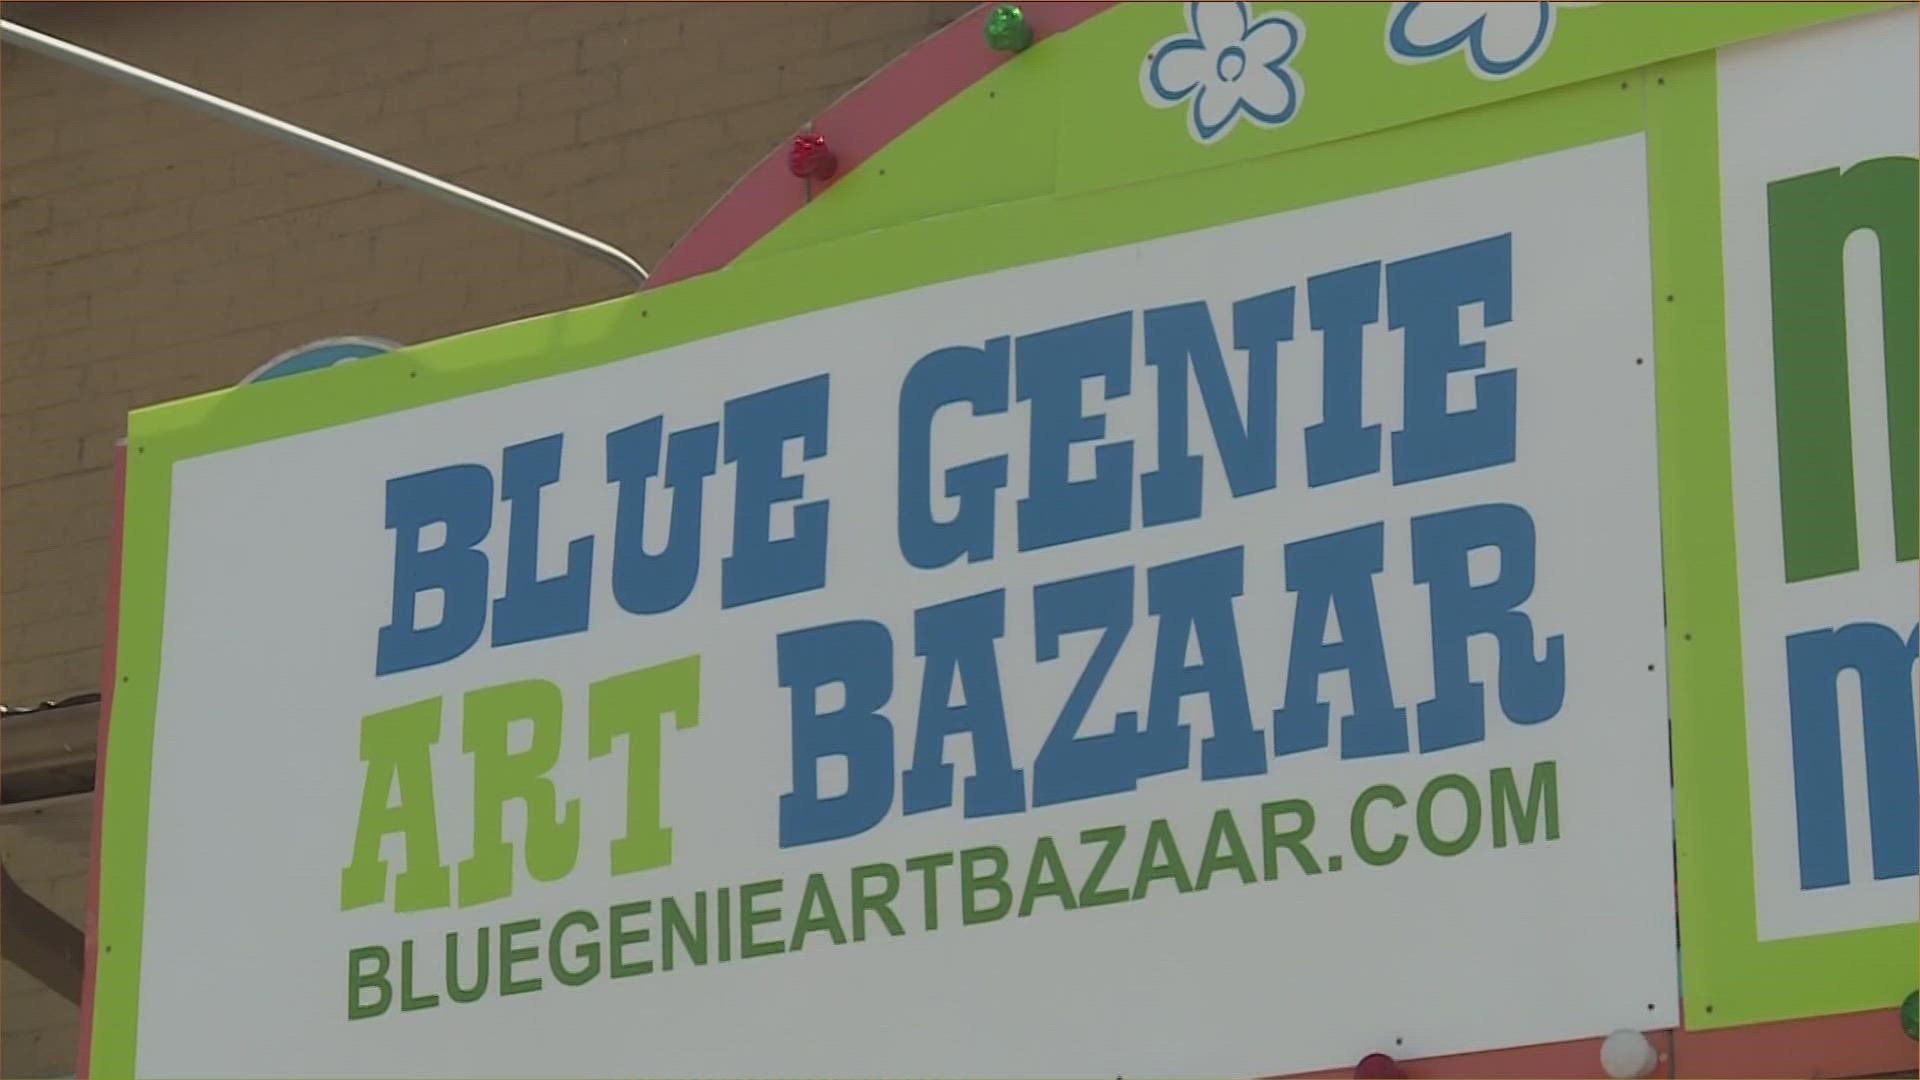 Starting Friday, you can find handmade gifts from local artists at the Blue Genie Art Bazaar.